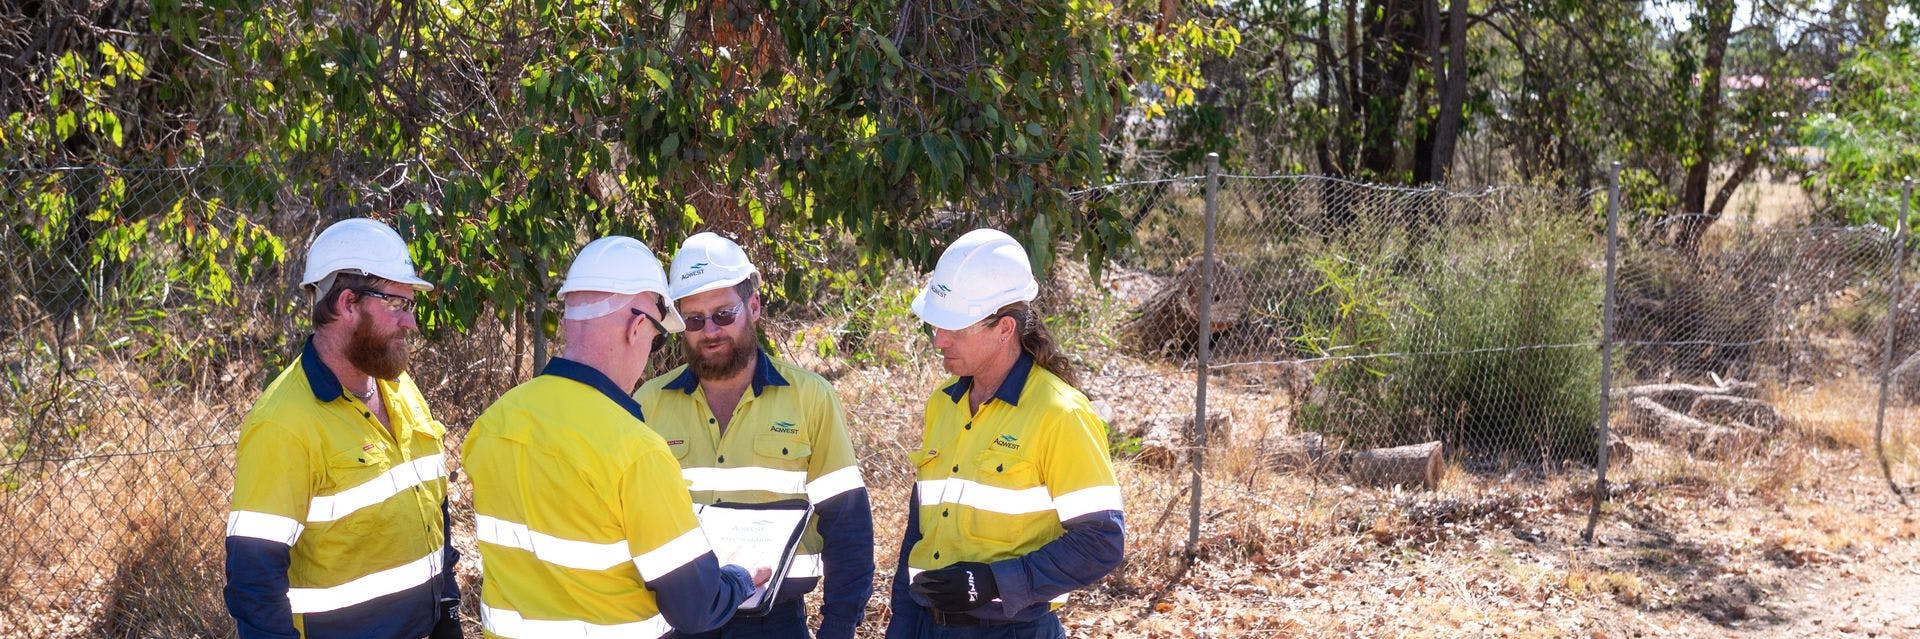 Four people in high vis and white hard hats discussing, in front of a some native trees.